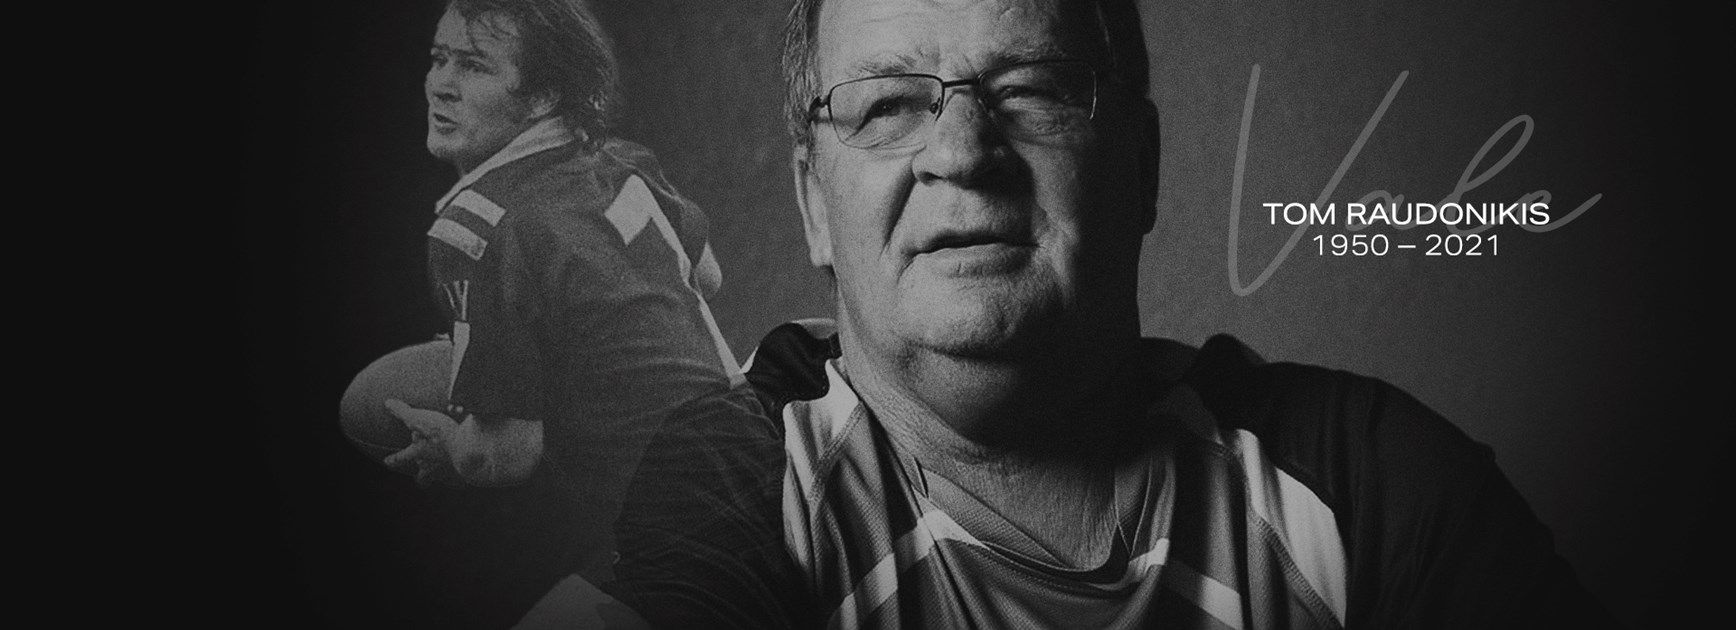 Vale Tommy Raudonikis